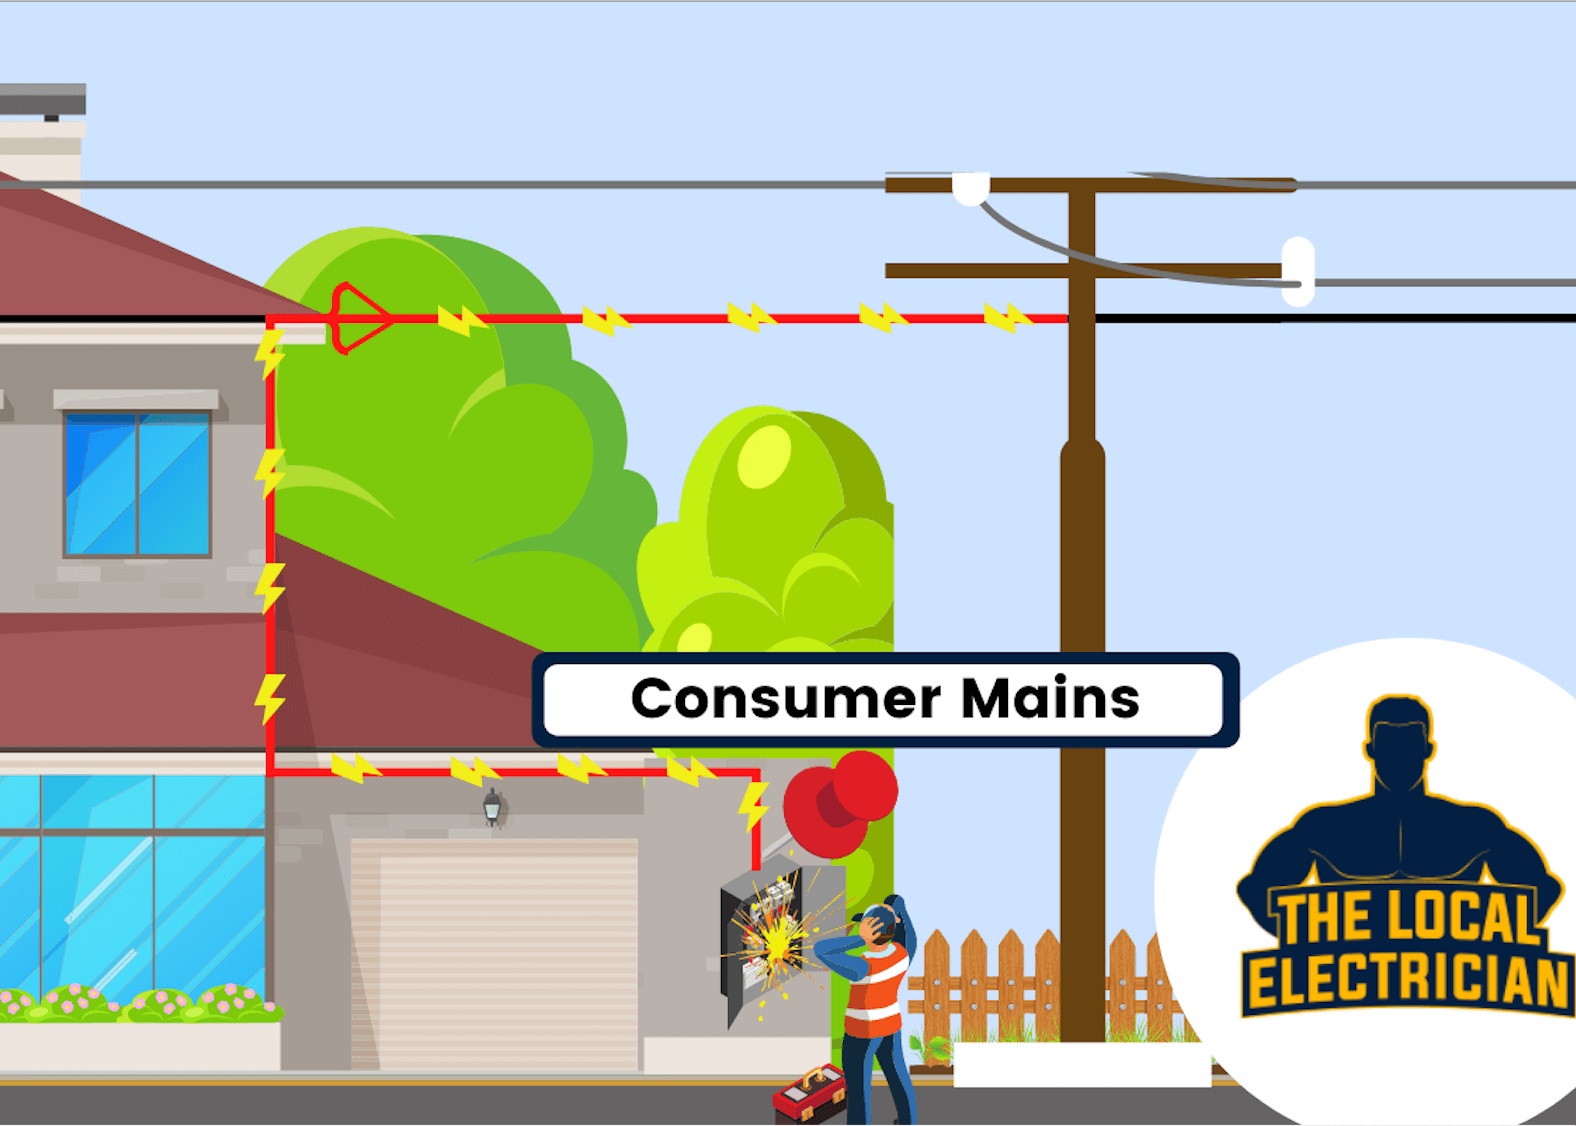 consumer-mains-infographic-the-local-electrician